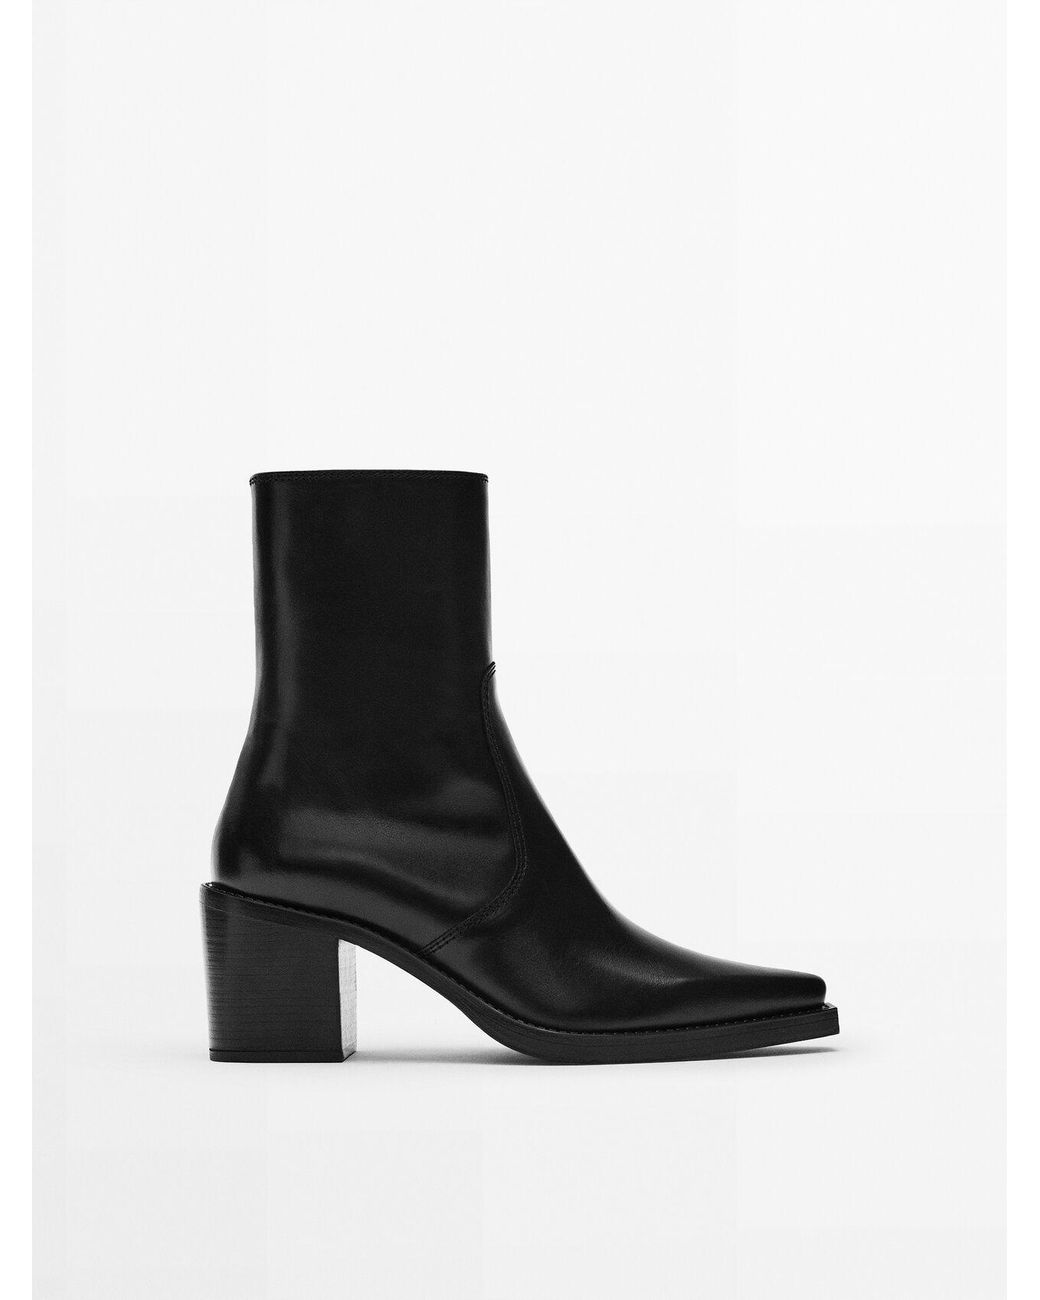 MASSIMO DUTTI Leather Square Heel Ankle Boots in Black | Lyst